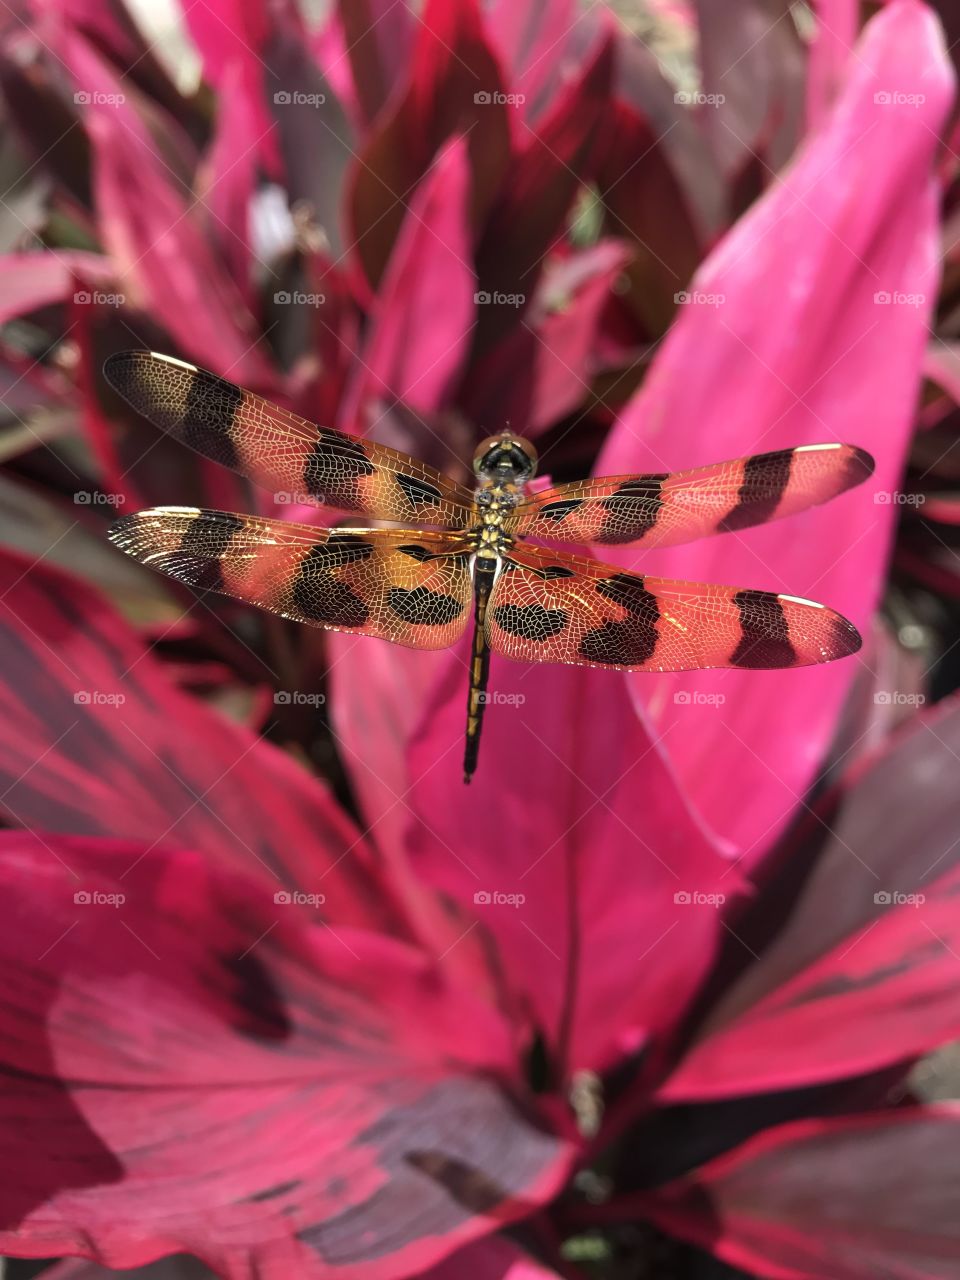 A dragonfly at a plant nursery in Florida 